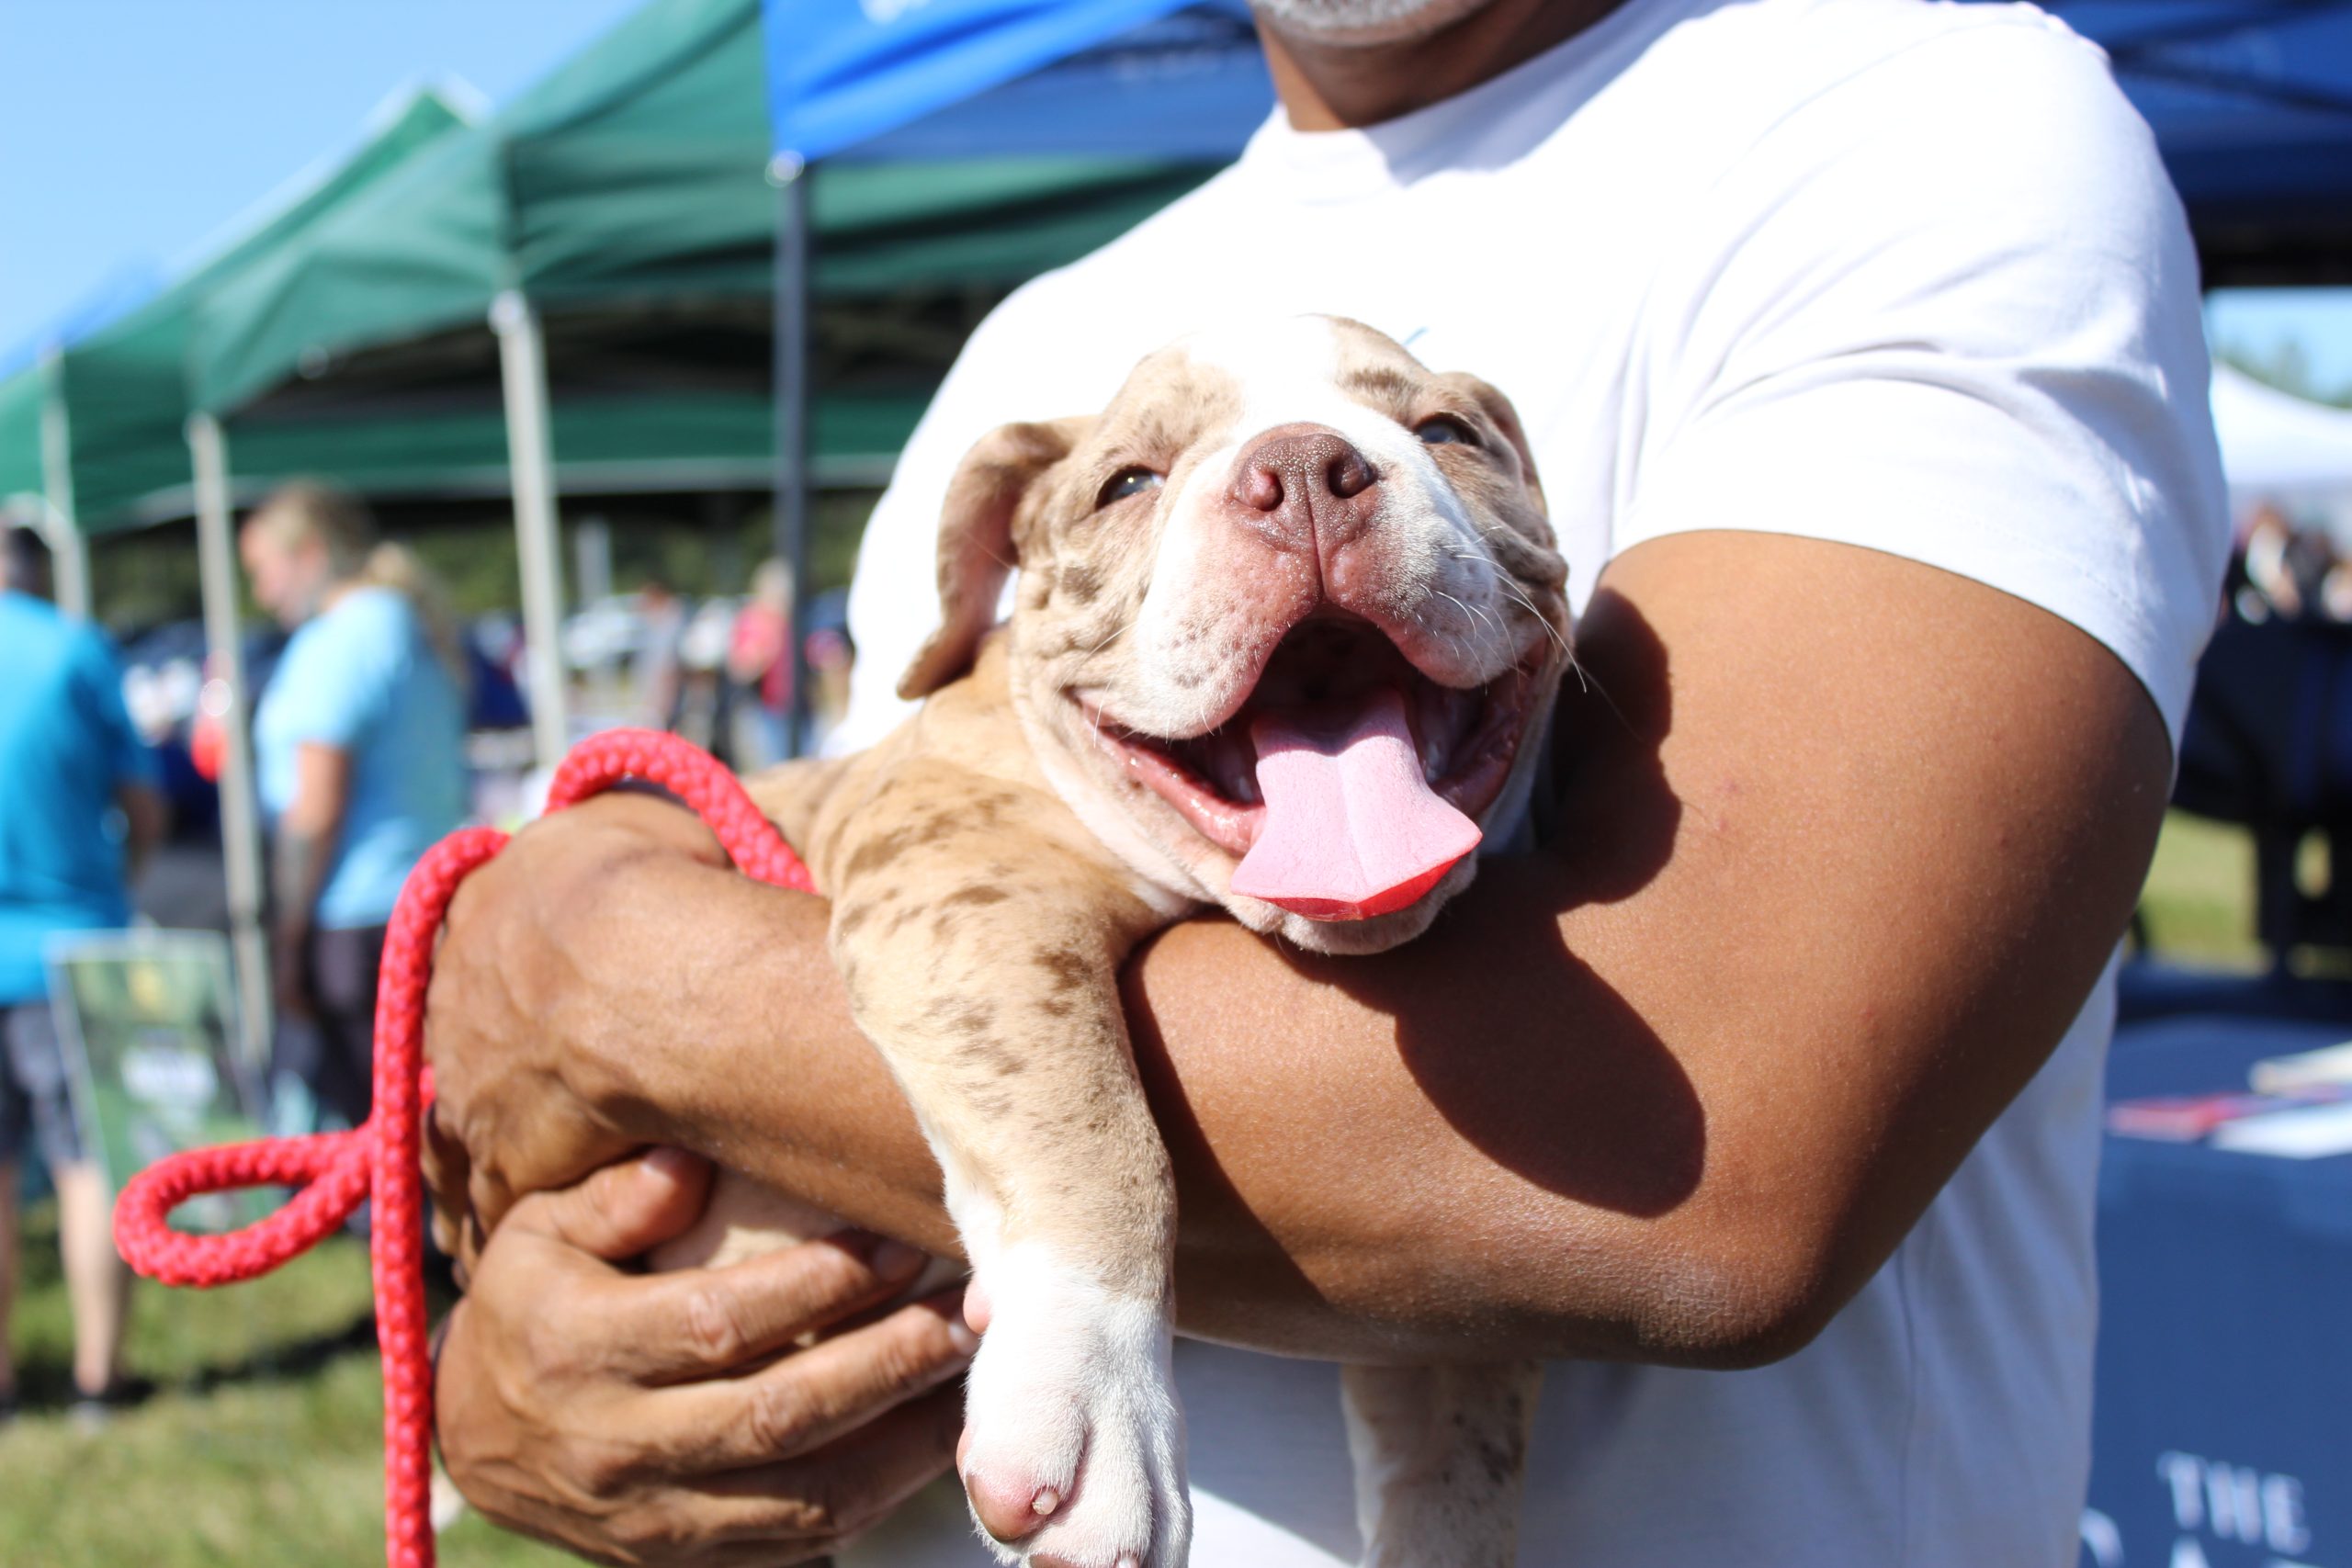 At the Parkland Farmers Market on Sunday, Nov. 19, many people had brought their dogs to the event. There were many kinds of dogs, ranging from enormous mastiffs to the smallest bulldogs.